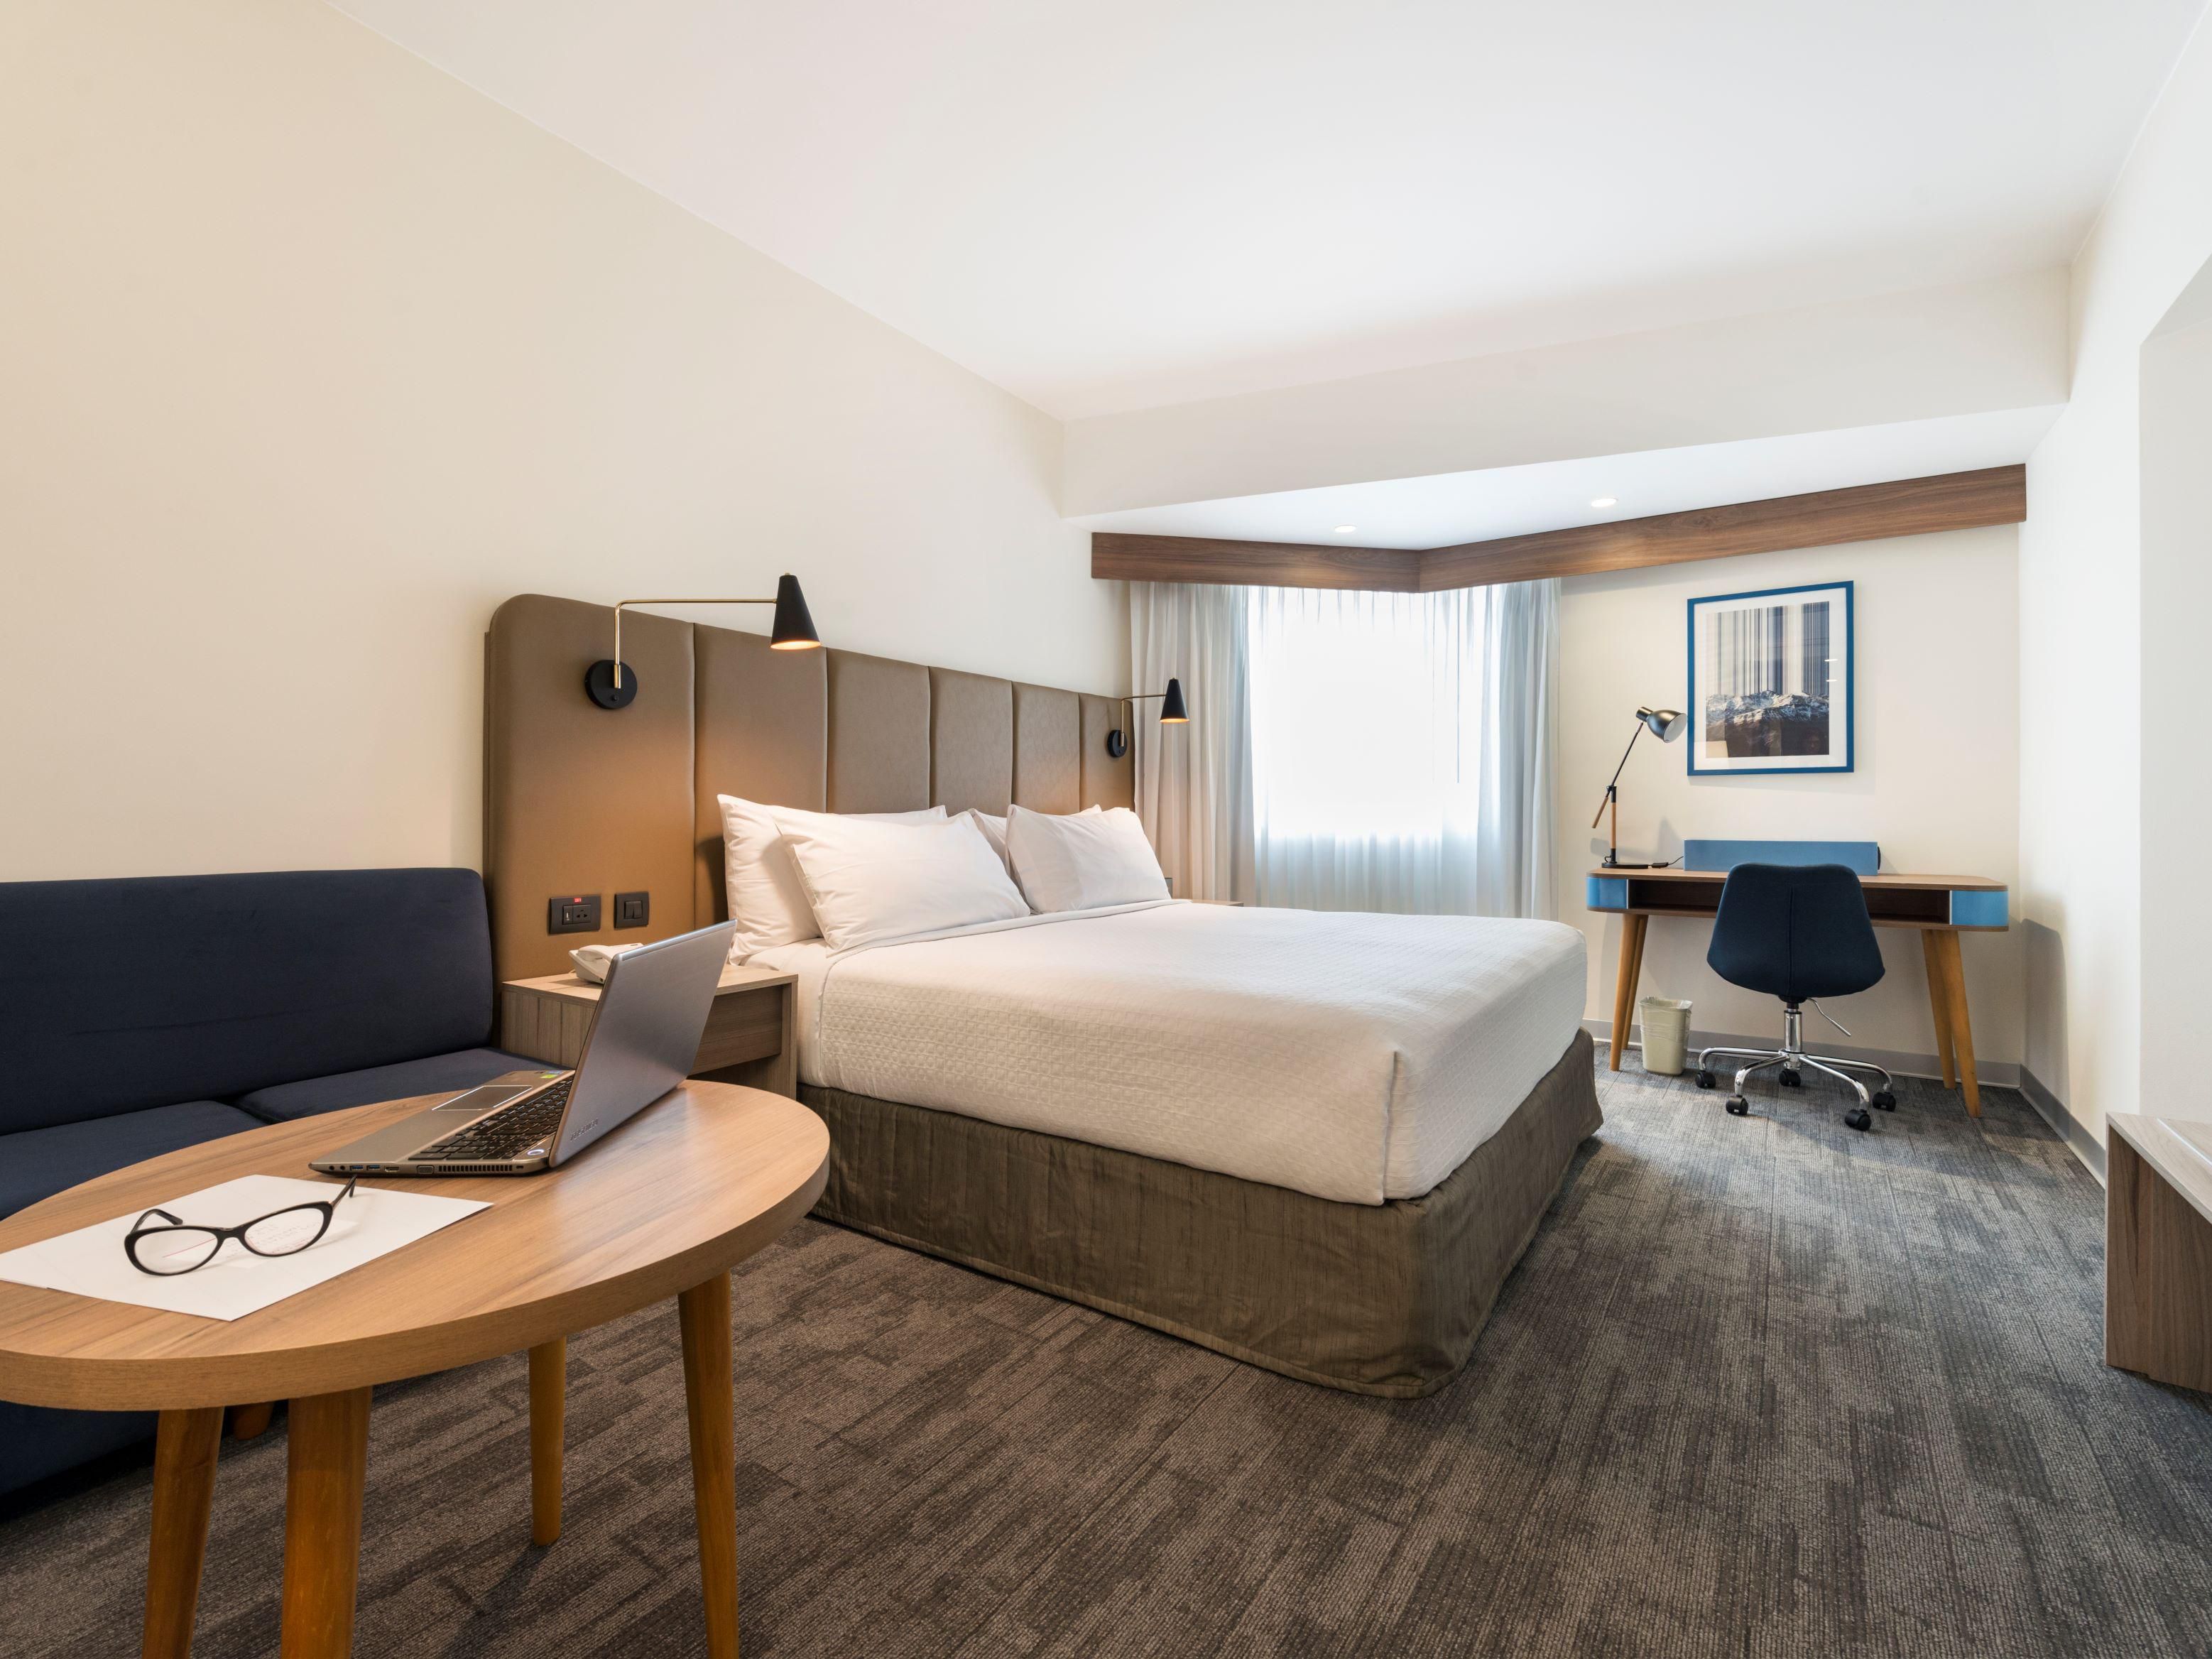 Our rooms have been remodeled with a much more modern essence, thinking about the needs and requirements of all our guests.

This is the time to live the experience of staying in the renovated rooms at Crowne Plaza Lima Miraflores and get to know one of the most touristic districts in Lima.

We wait for you soon!